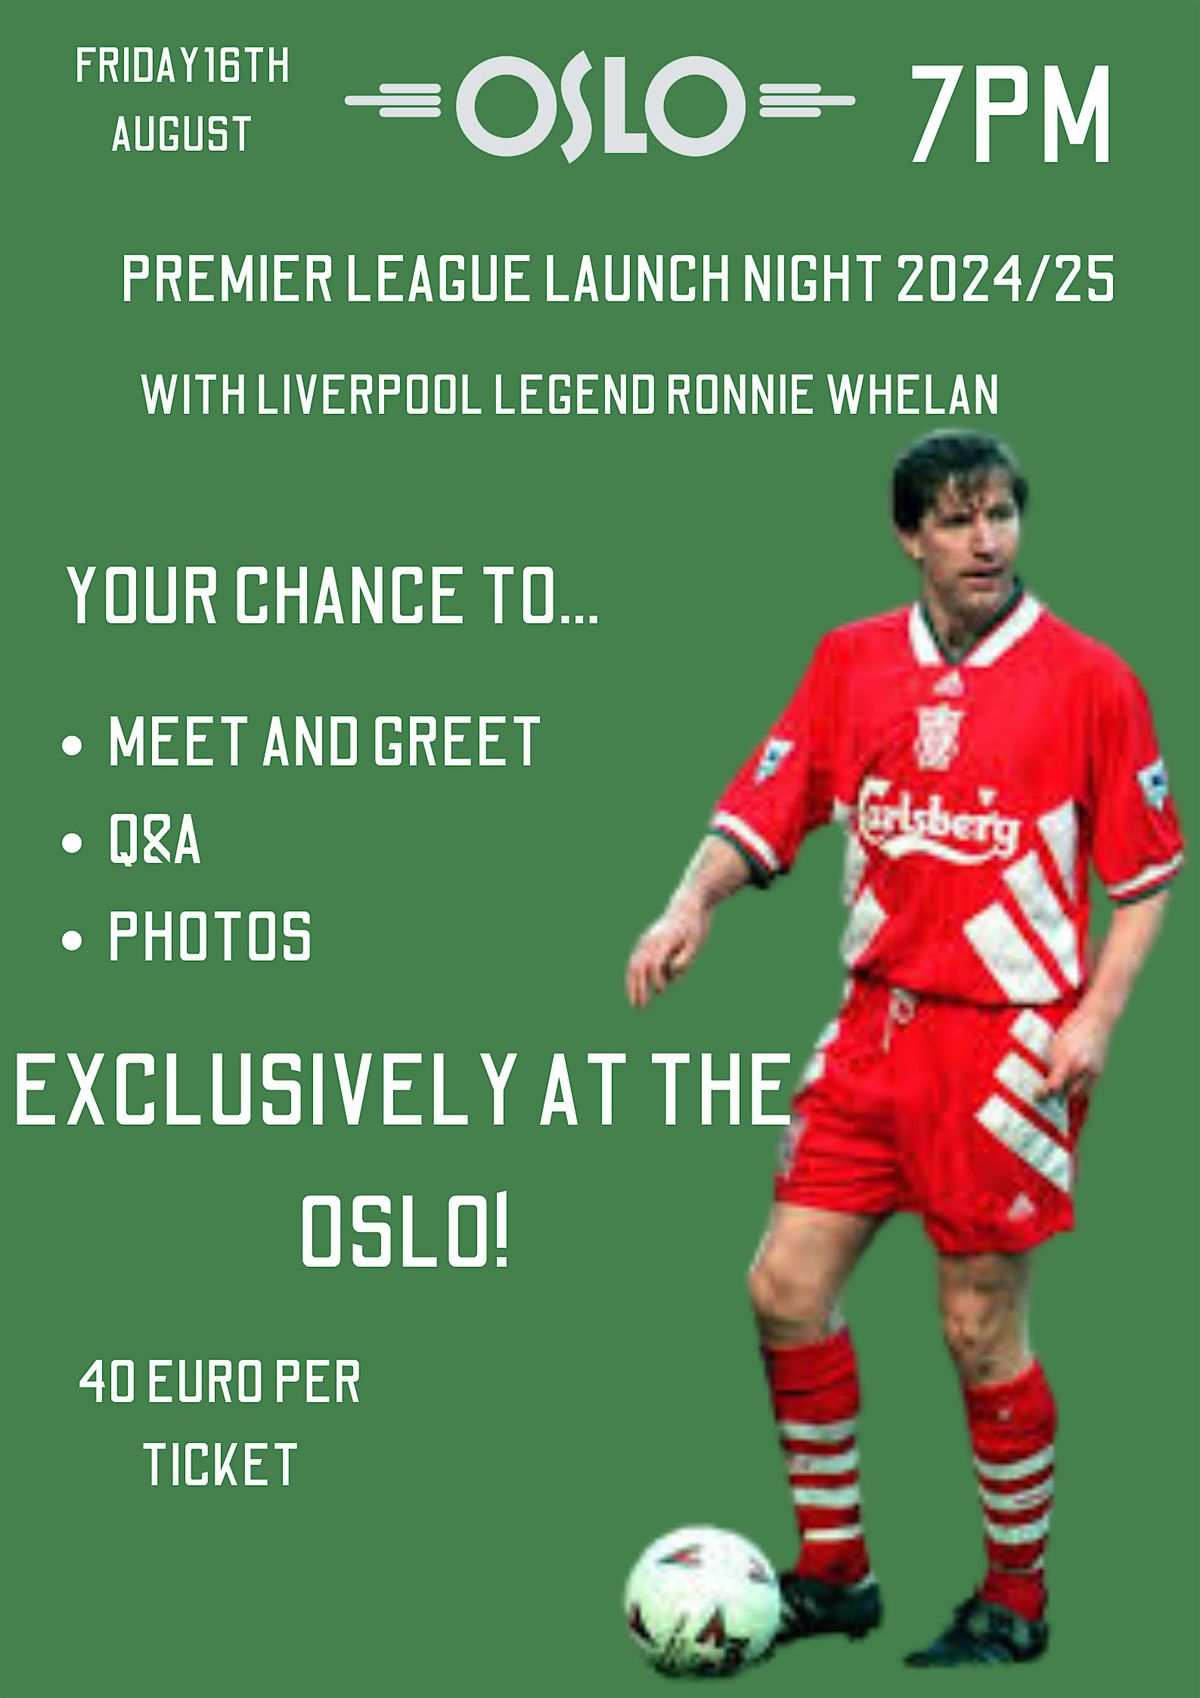 Premier League Launch Night with Liverpool Legend Ronnie Whealan